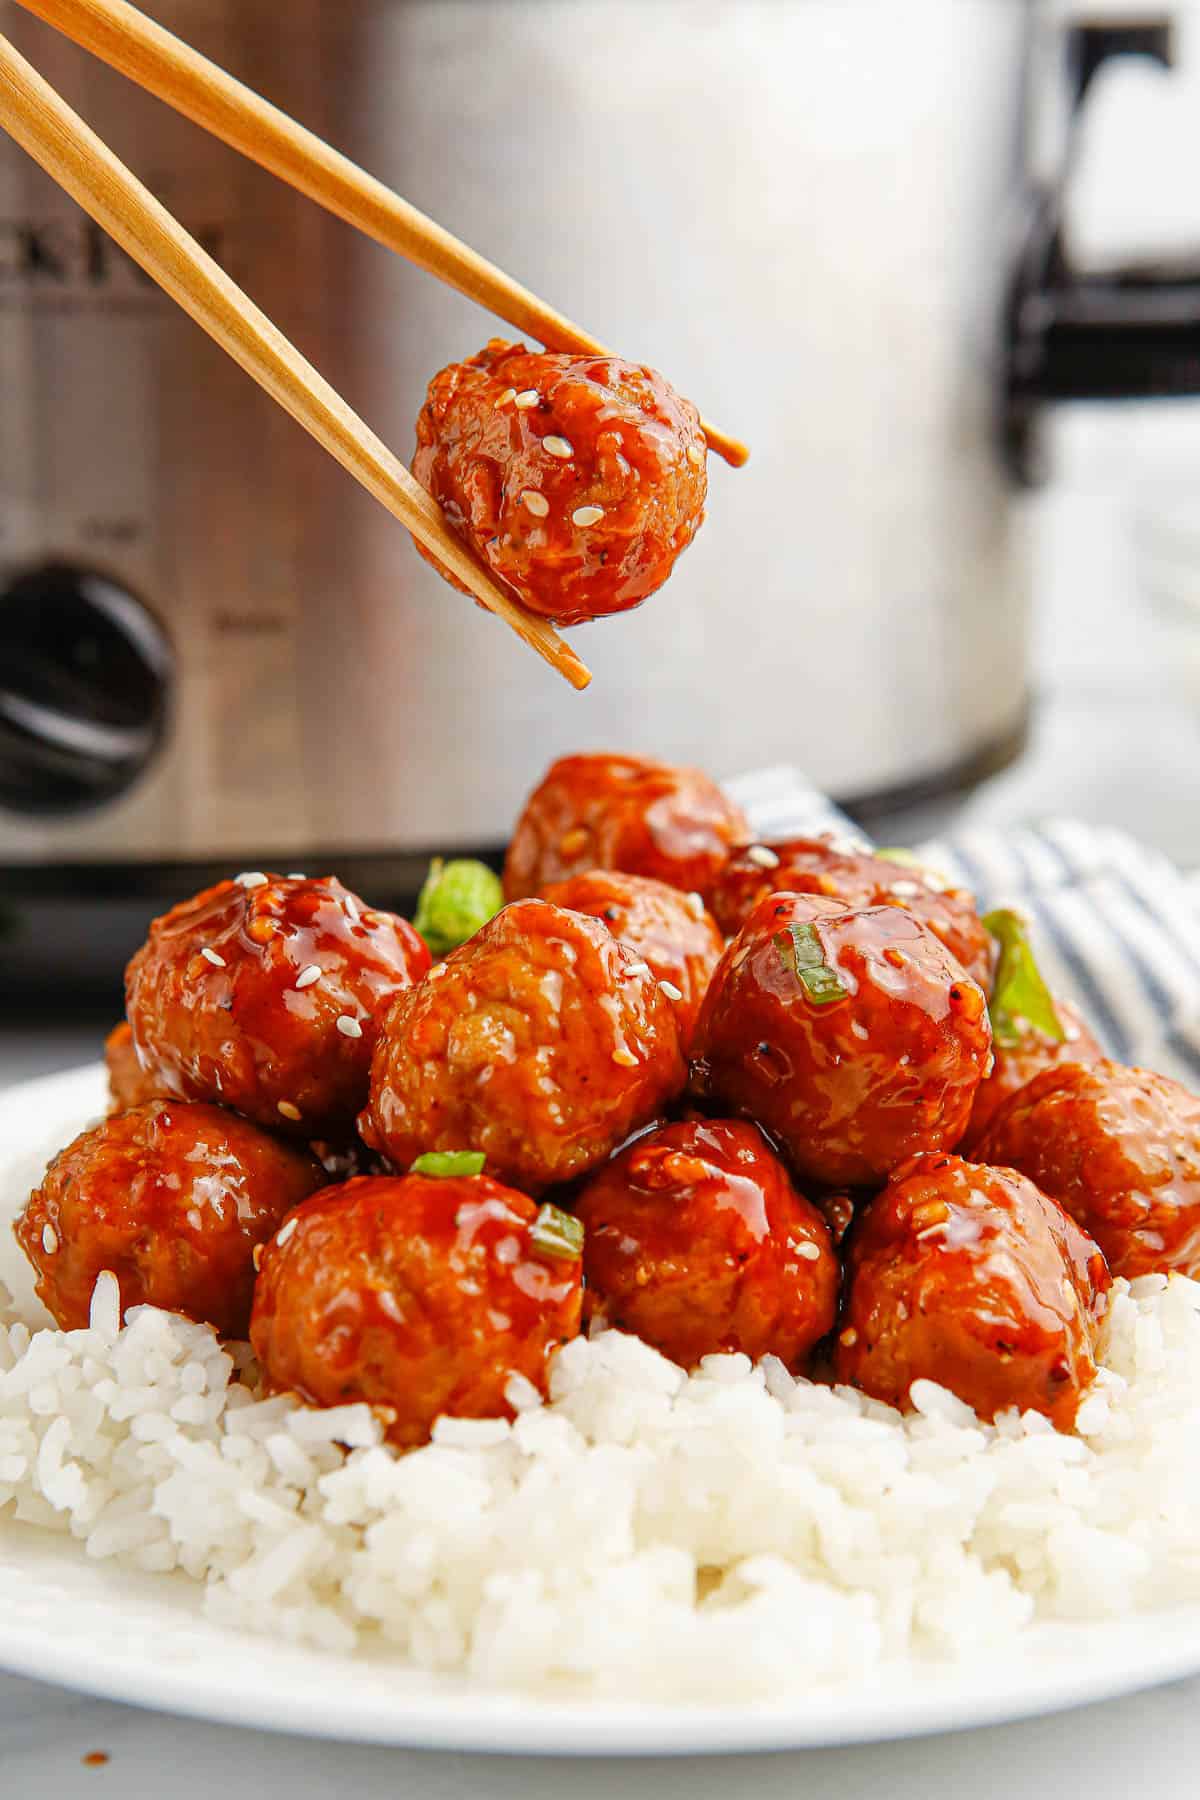 A single Korean barbecue meatball being help up with chopsticks over a bowl of more meatballs.